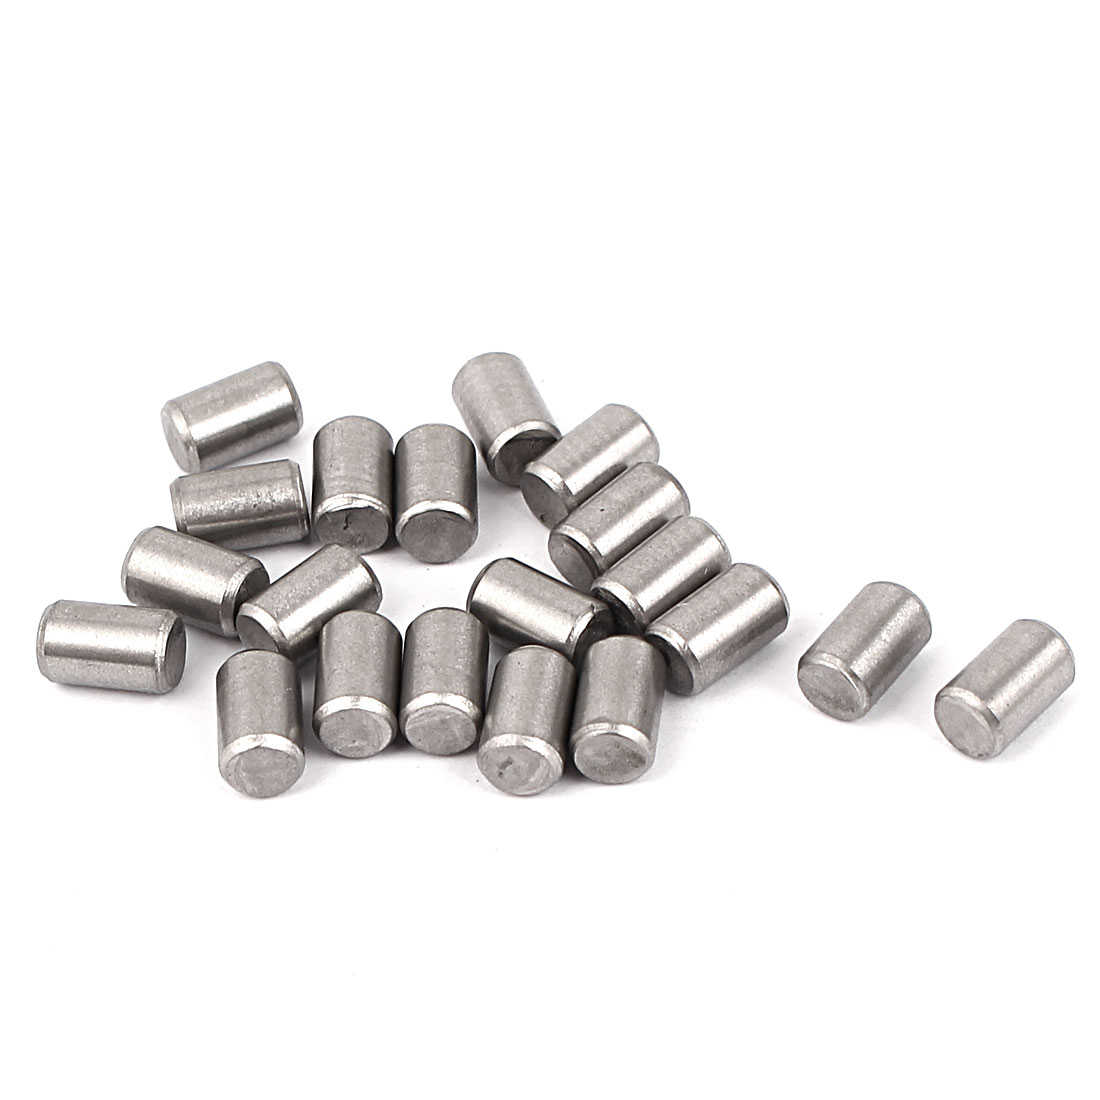 M5x8mm Stainless Steel Parallel Dowel Pins Fastener Elements 20pcs